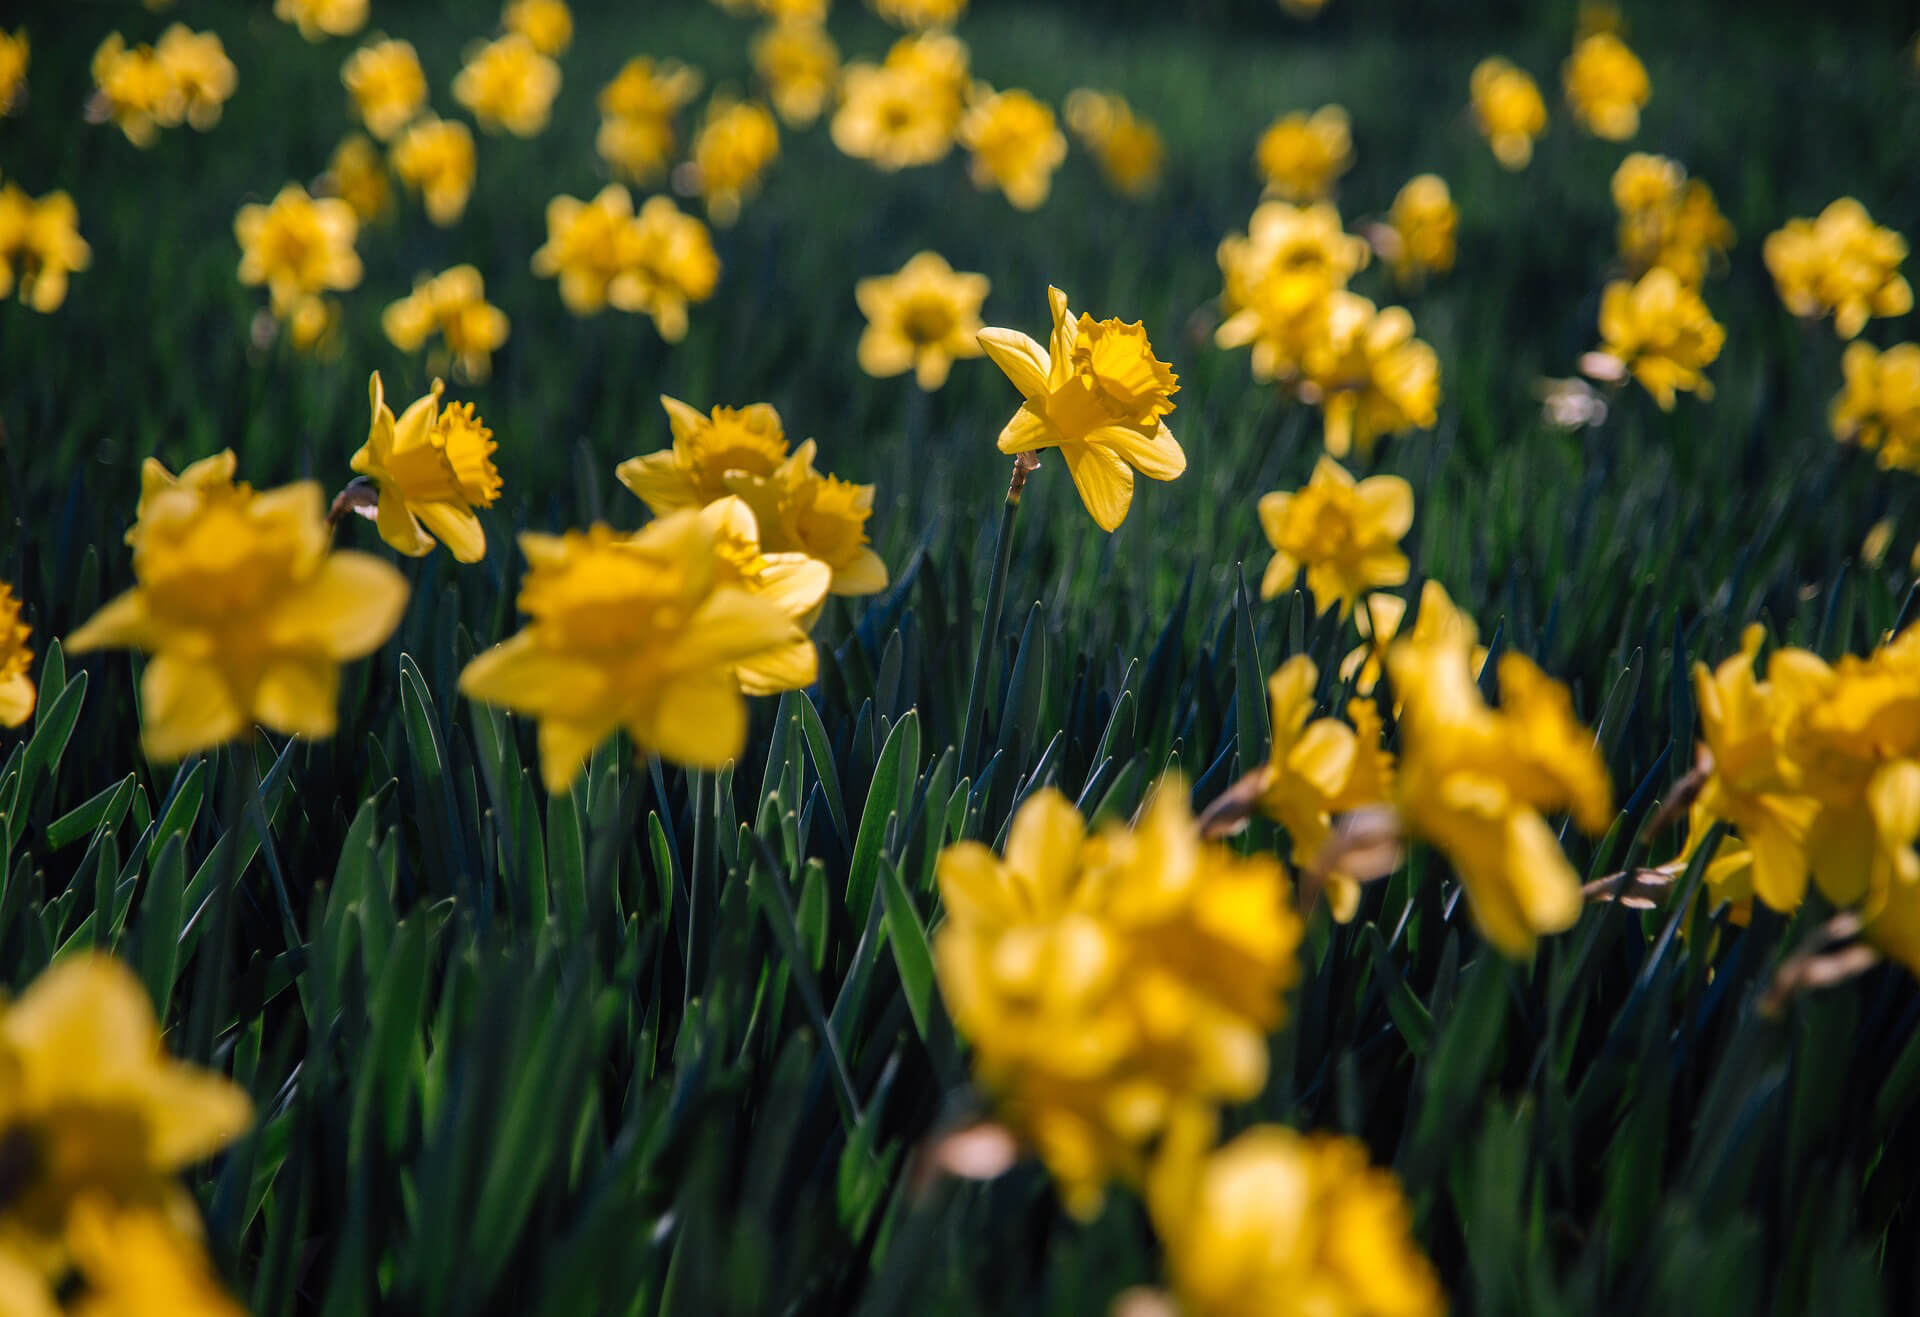 A field of yellow daffodils.